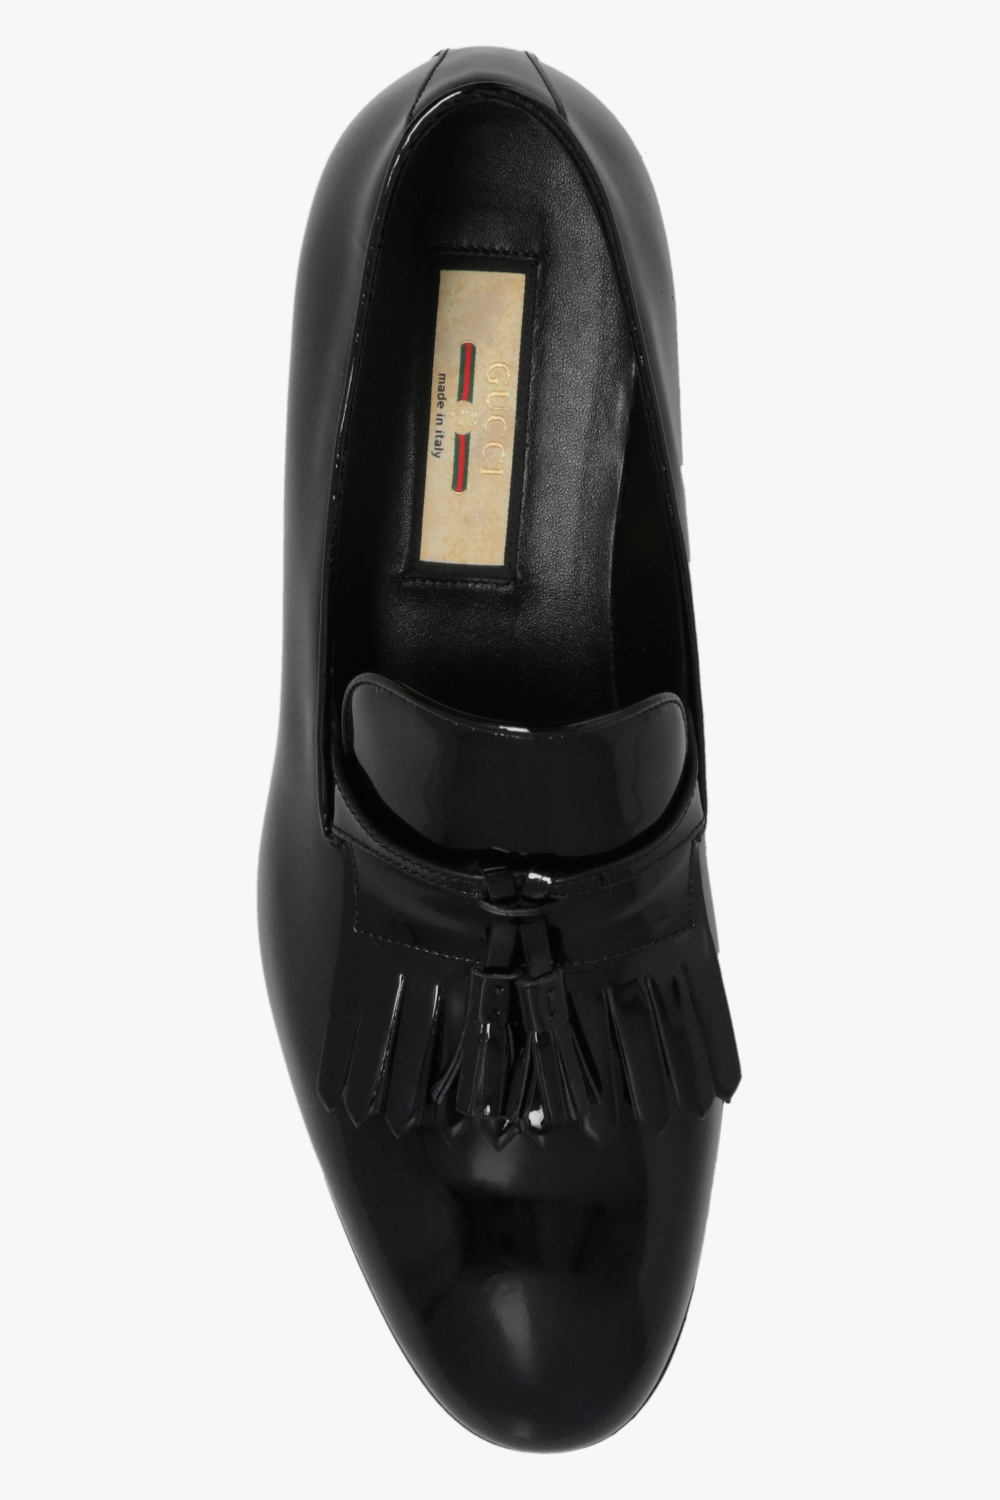 gucci jumper Patent-leather loafers